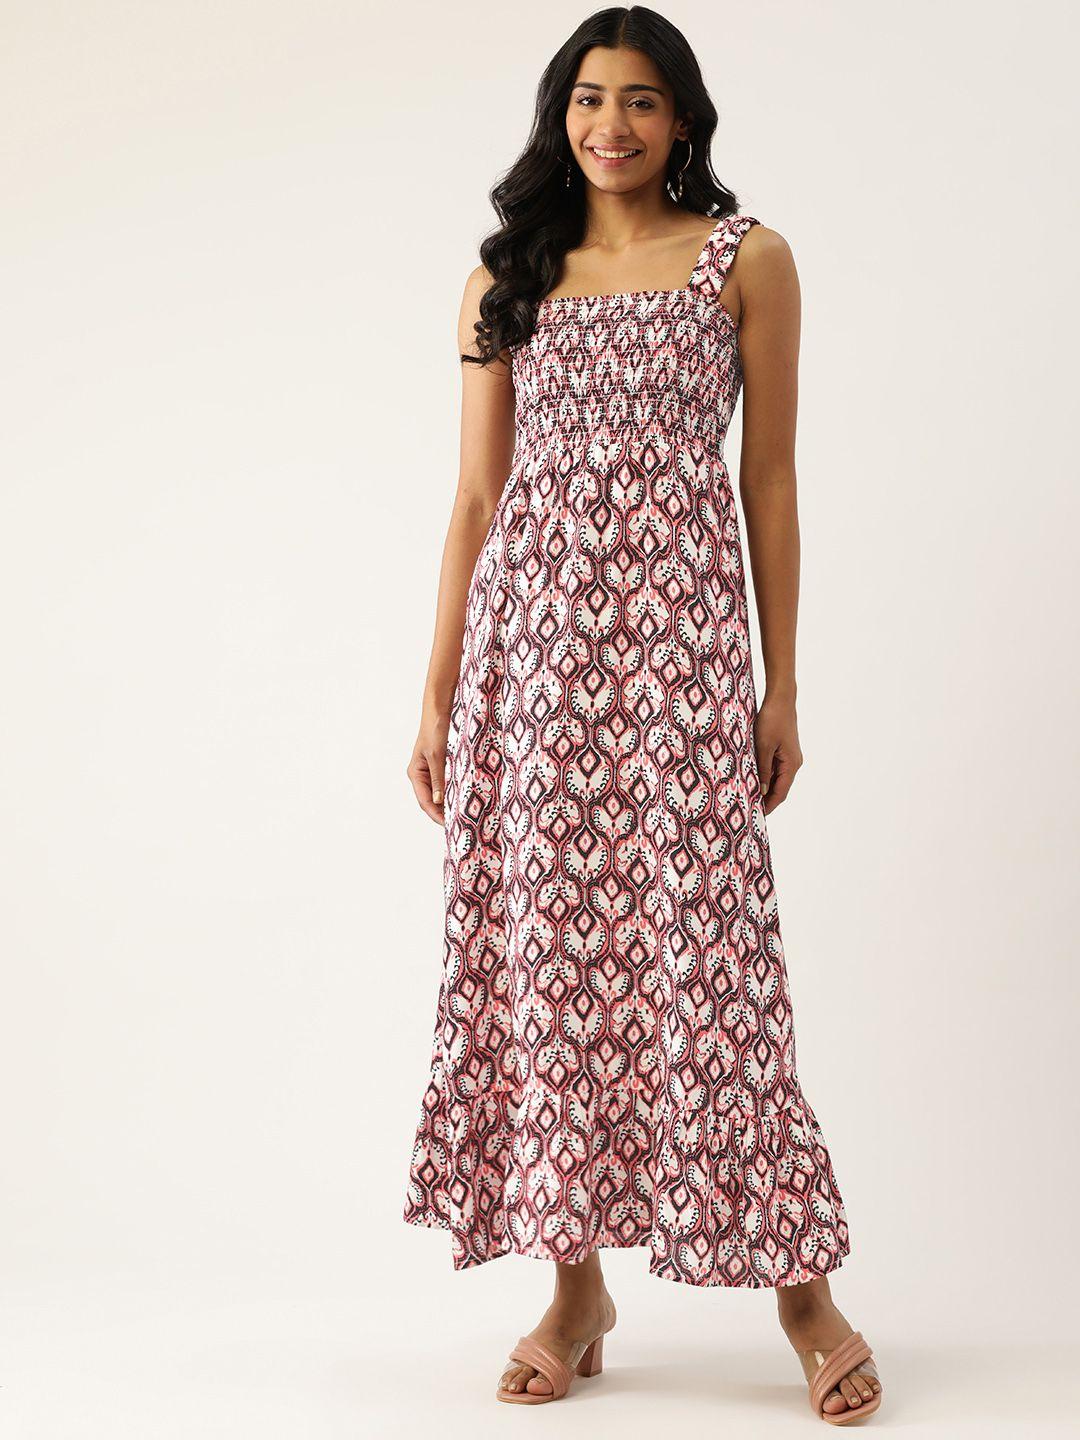 rue collection white & black printed maxi dress